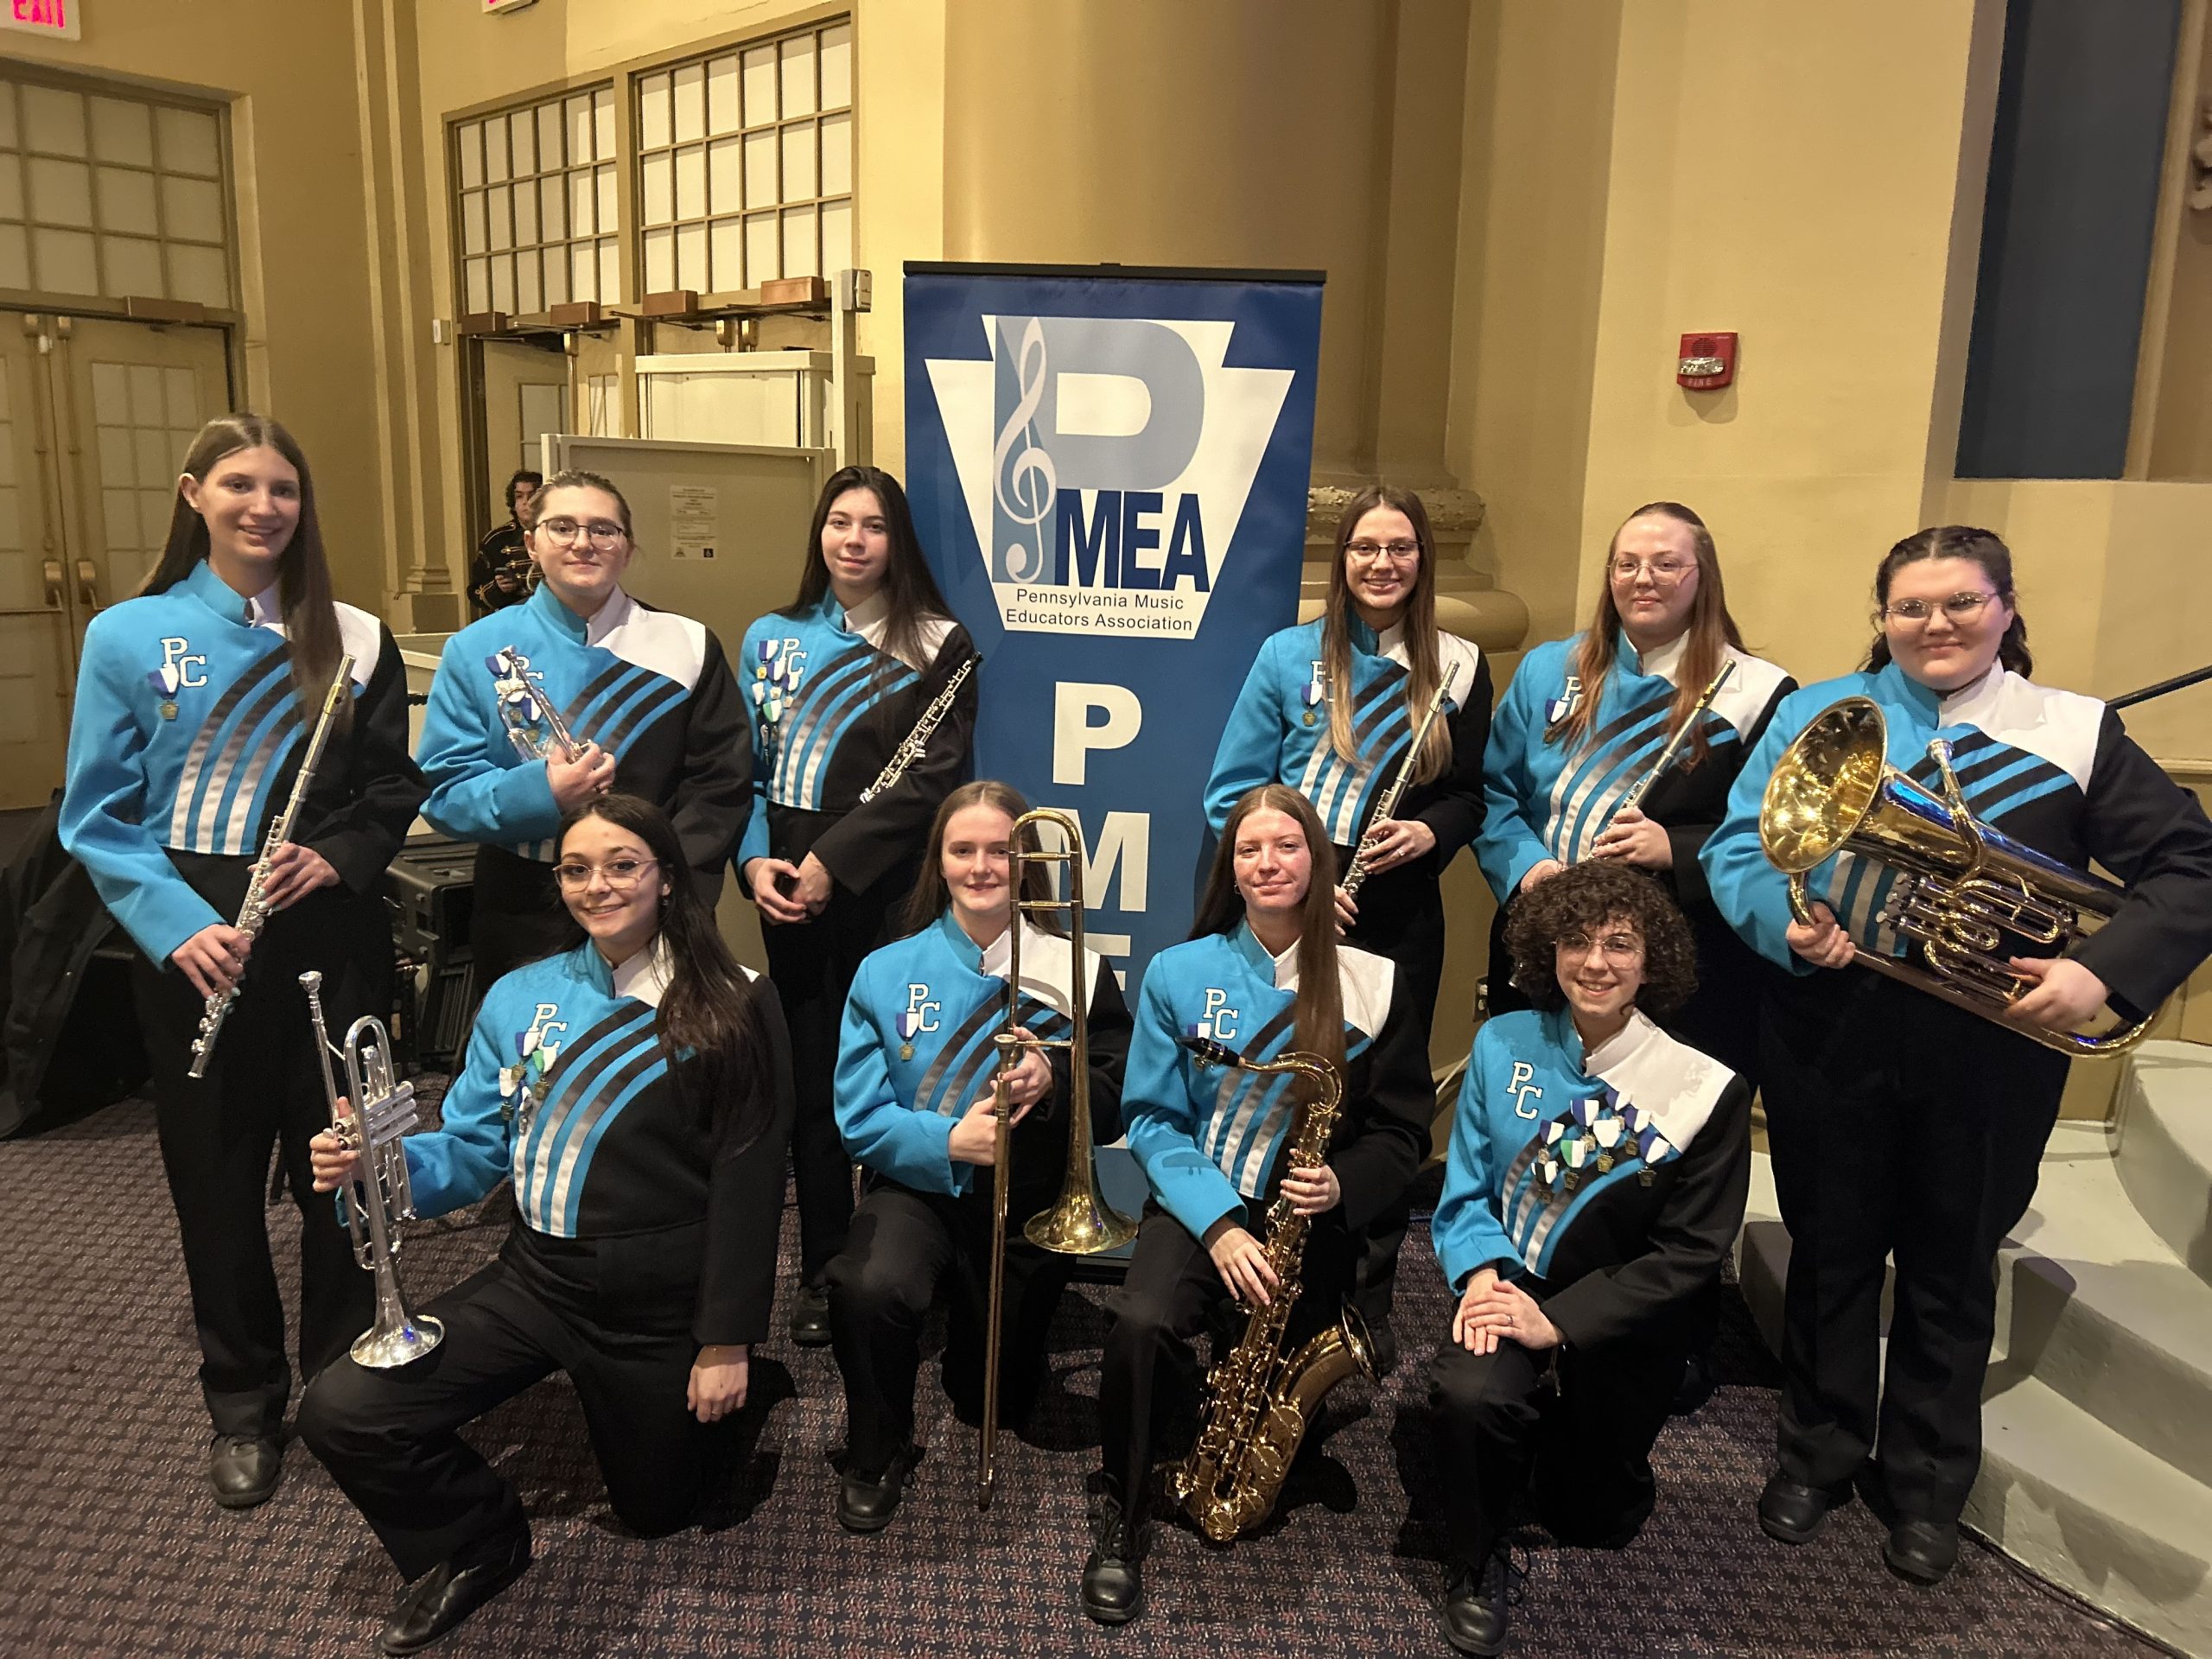 Congratulations to these ten students for participating in District Band at Greater Johnstown